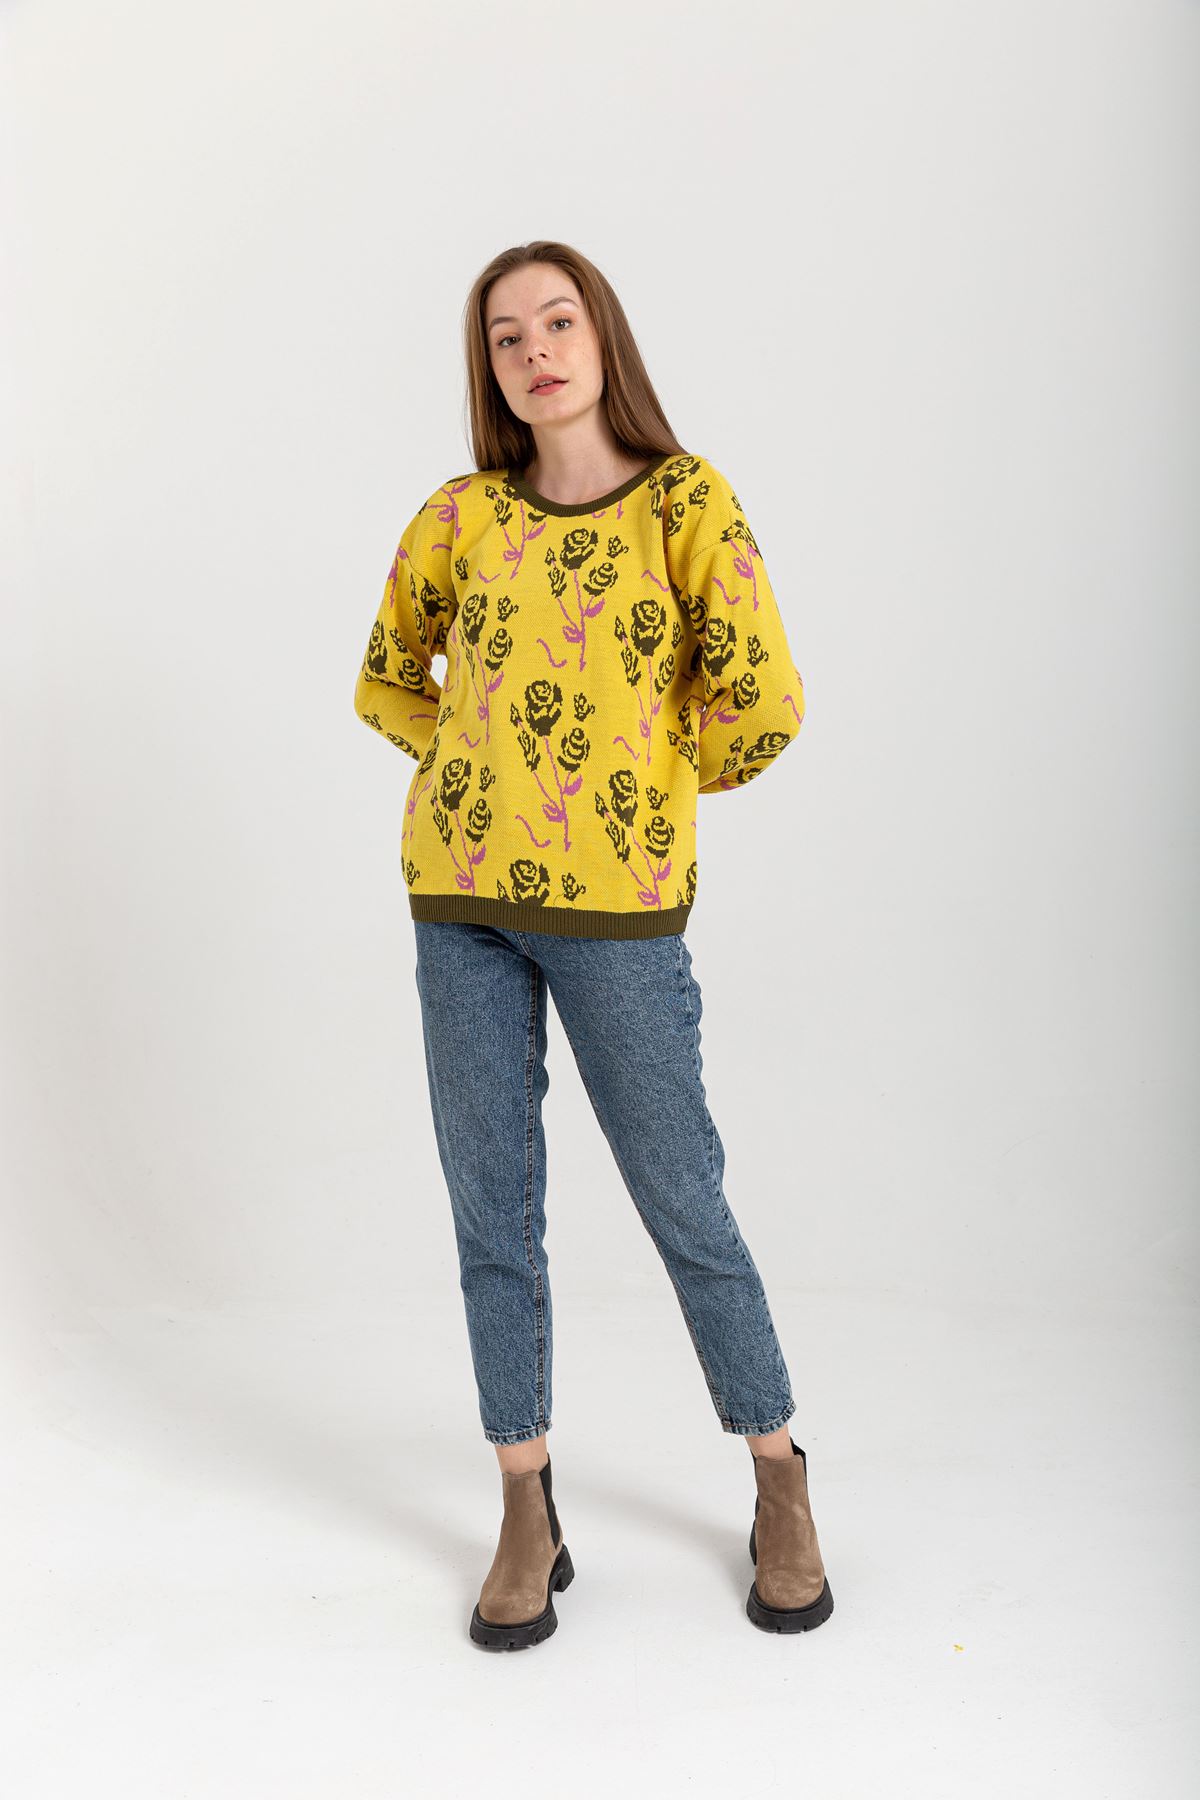 Knitwear Fabric Long Sleeve Bicycle Collar Floral Print Women Sweater - Yellow